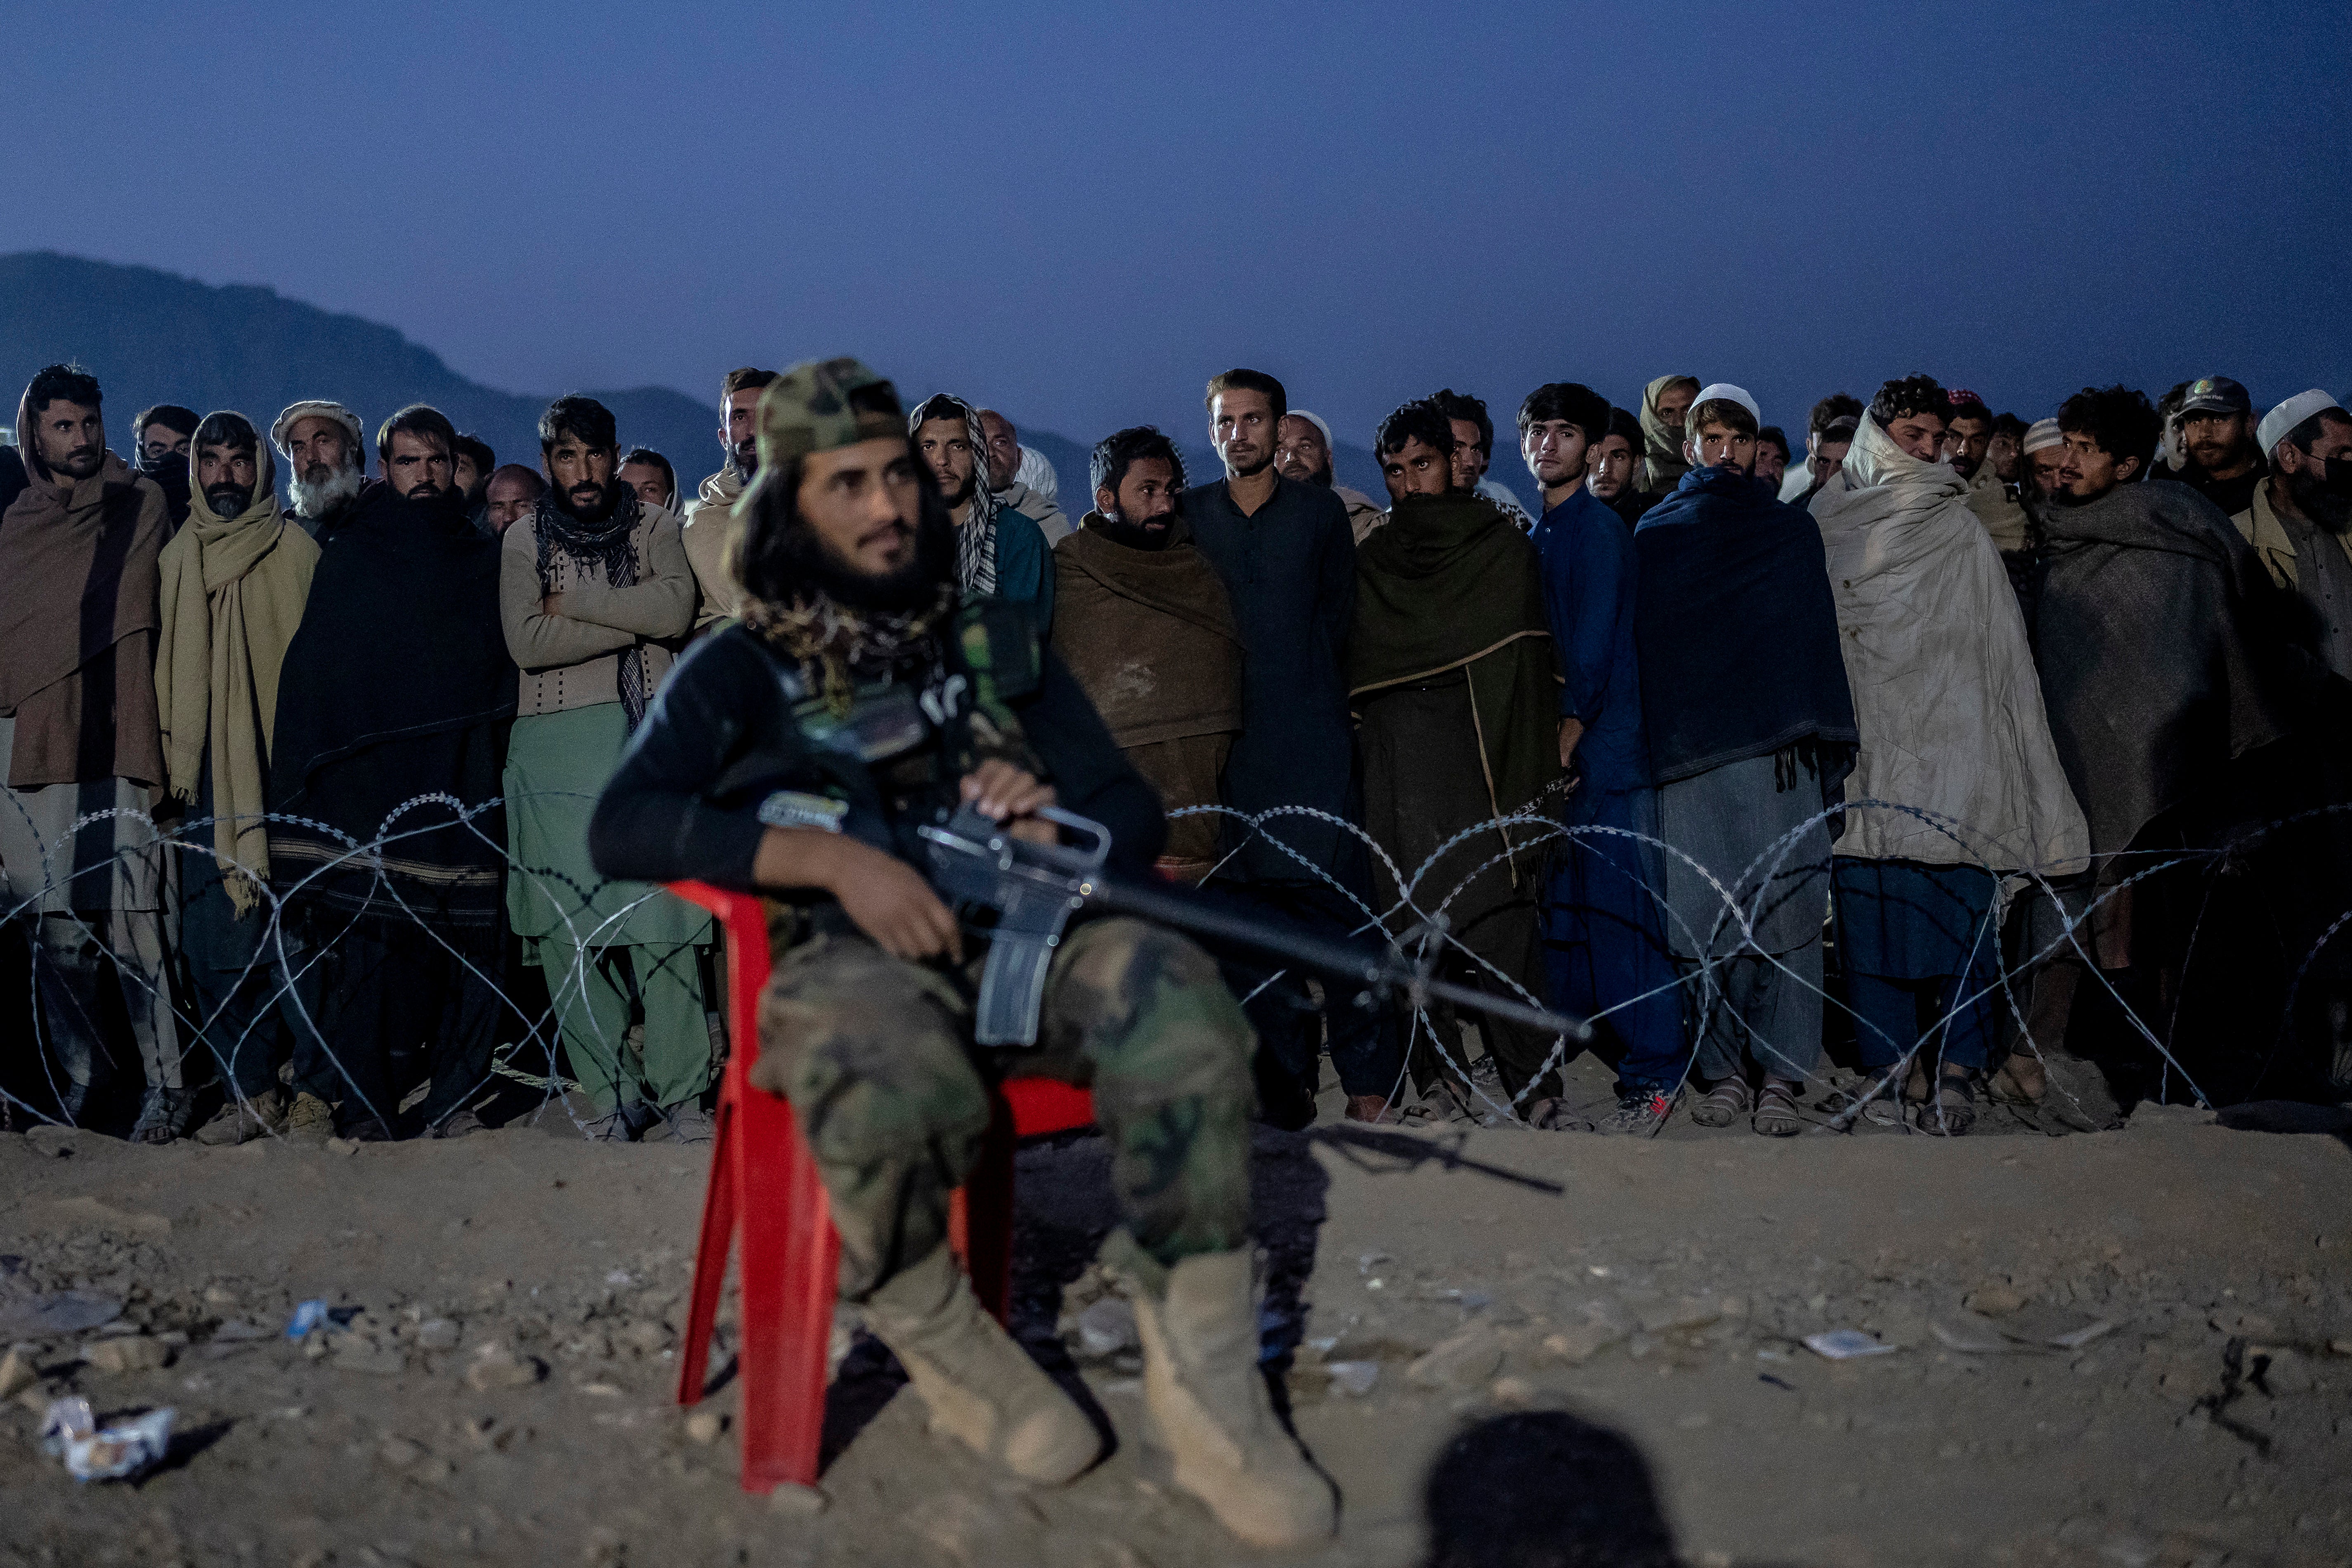 A Taliban fighter stands guard as Afghan refugees line up to register in a camp near the Pakistan-Afghanistan border